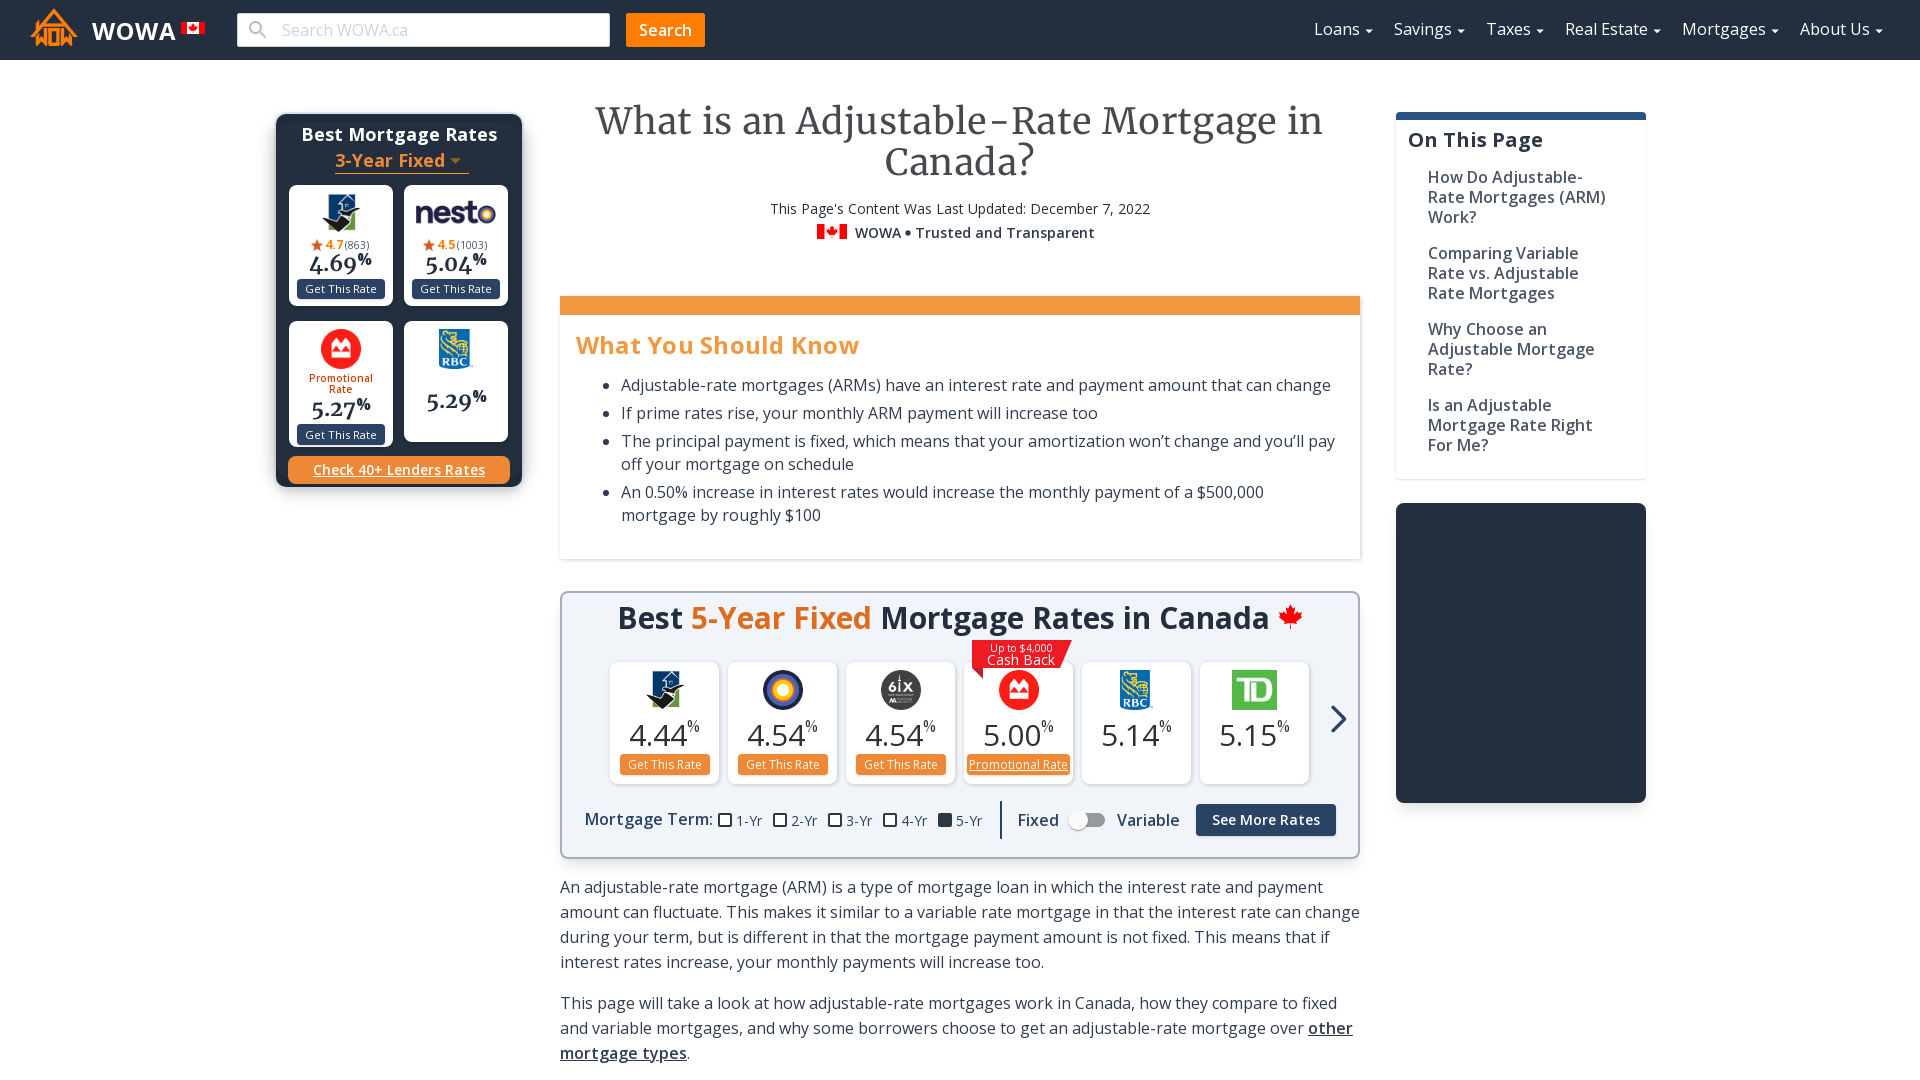 adjustable-rate-mortgage-arm-in-canada-wowa-ca